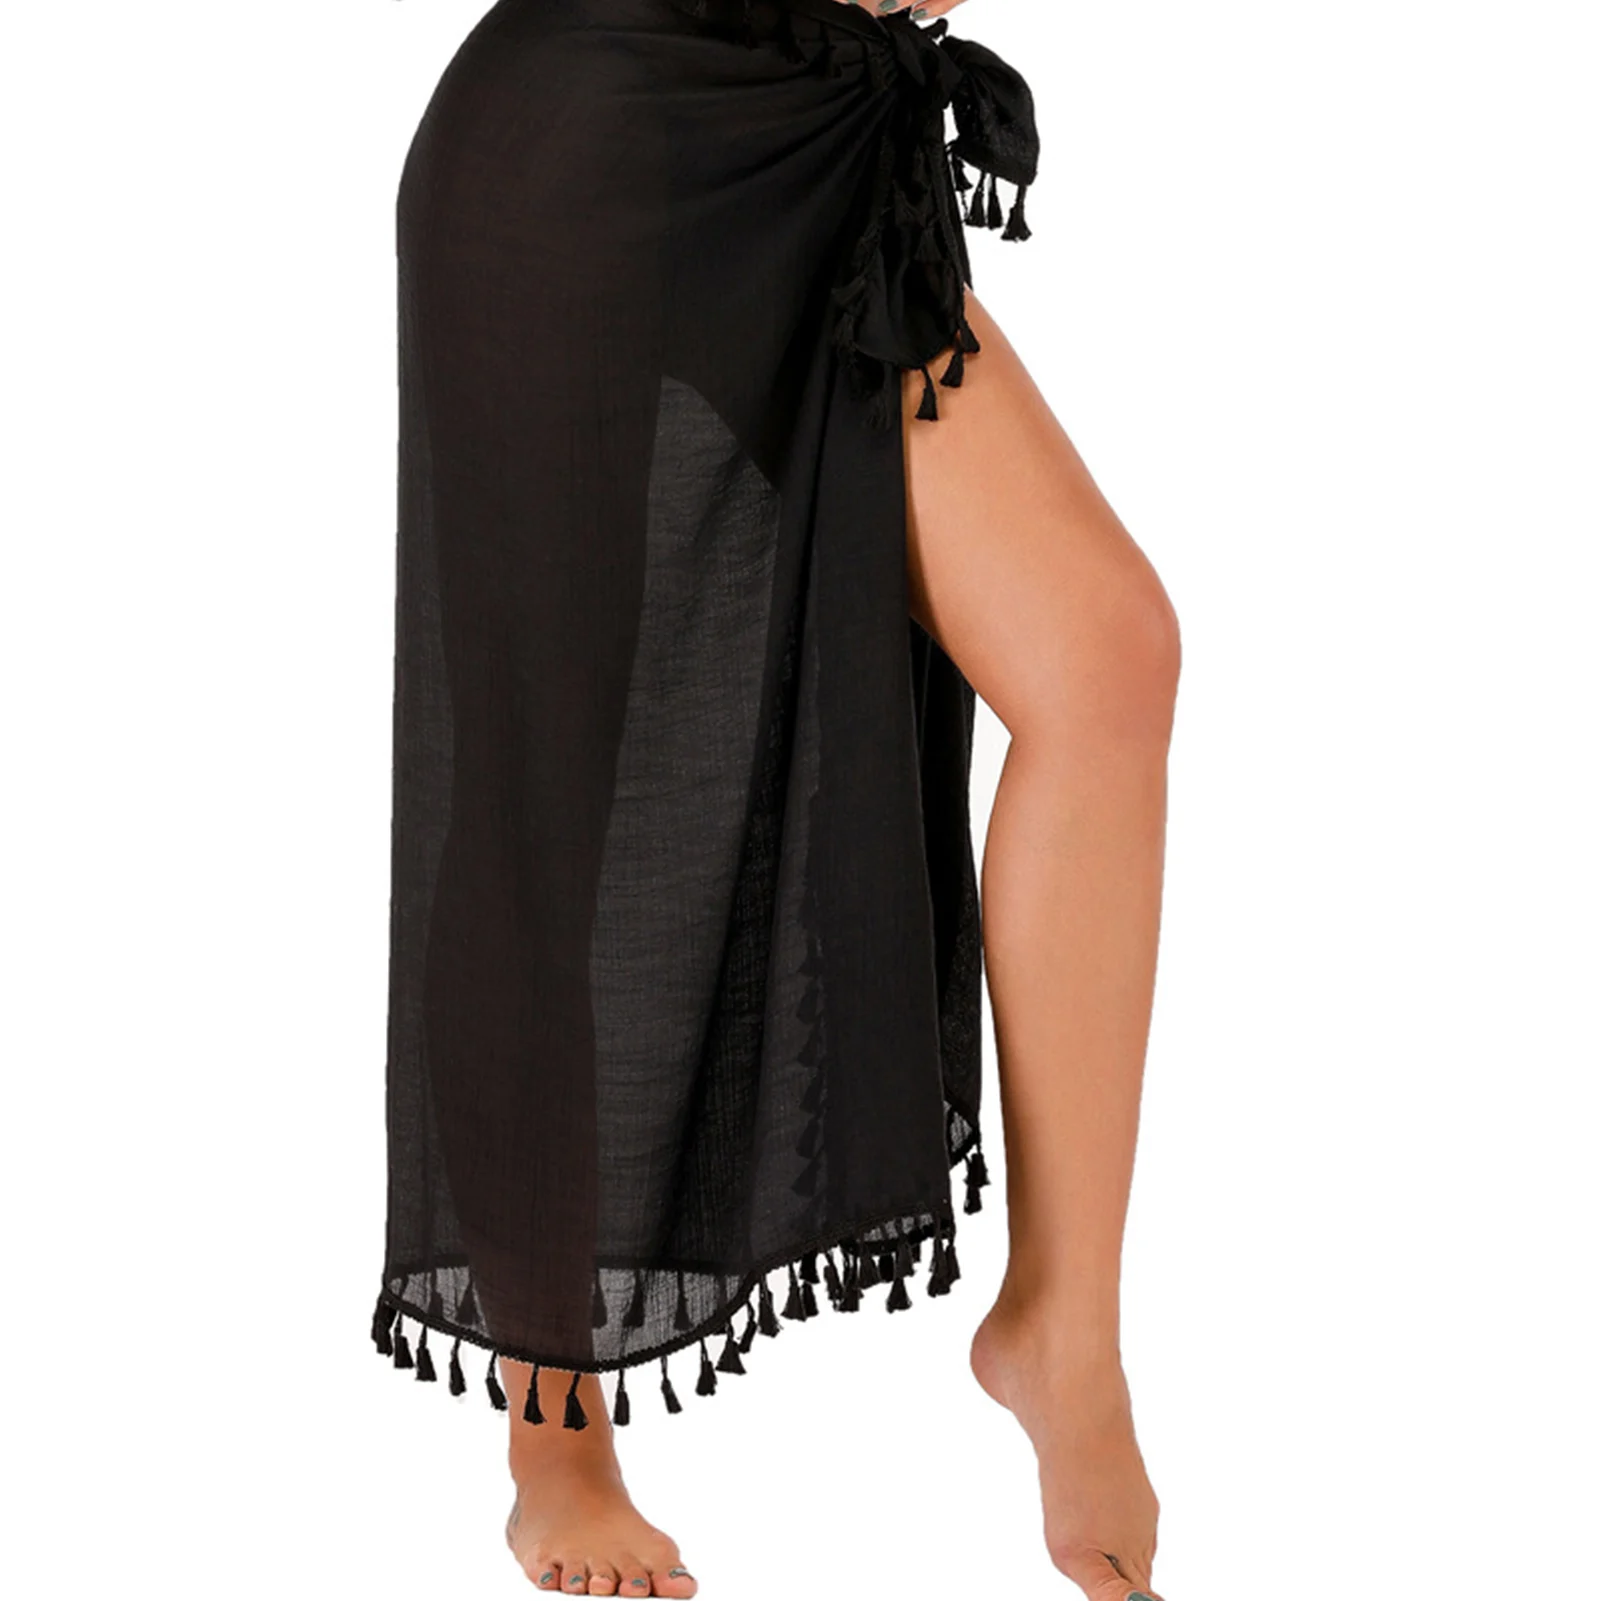 

With Tassels Scarf Cotton Blend Sexy Summer Casual Cover Ups Swimwear Pareo Women Beach Sarong Soft Long Skirt Fashion